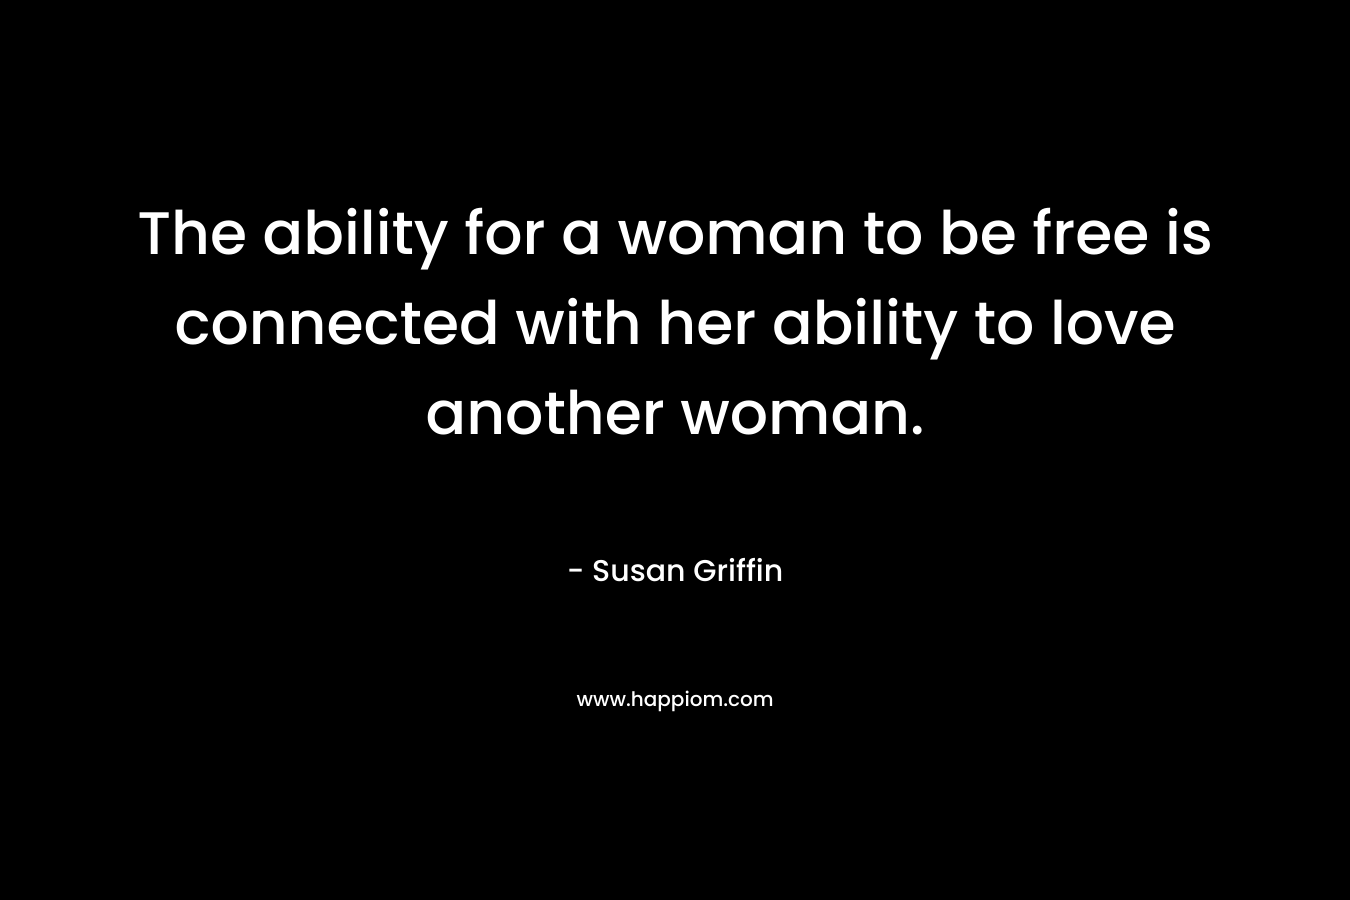 The ability for a woman to be free is connected with her ability to love another woman. – Susan Griffin